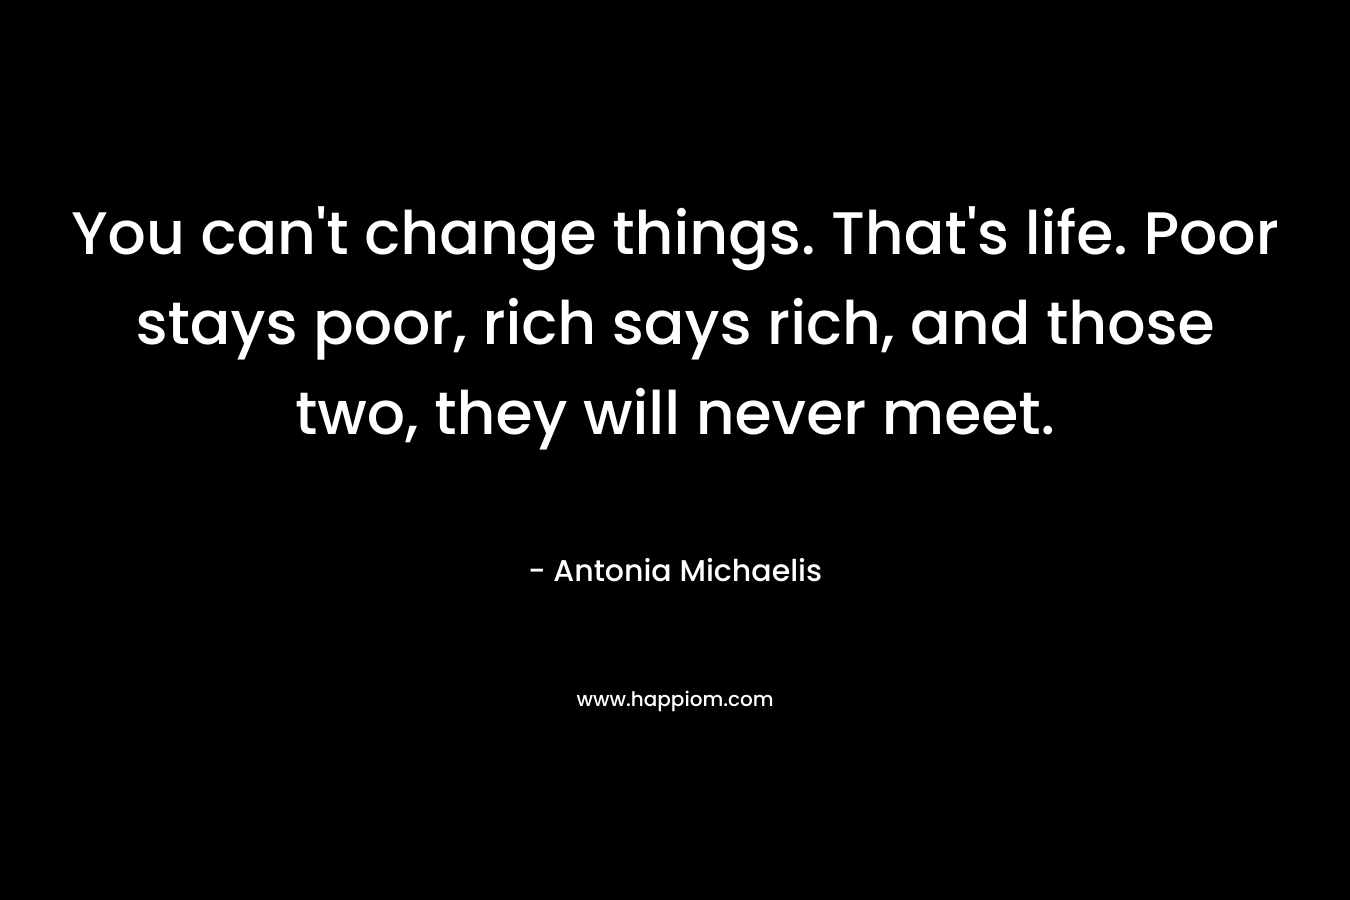 You can't change things. That's life. Poor stays poor, rich says rich, and those two, they will never meet.